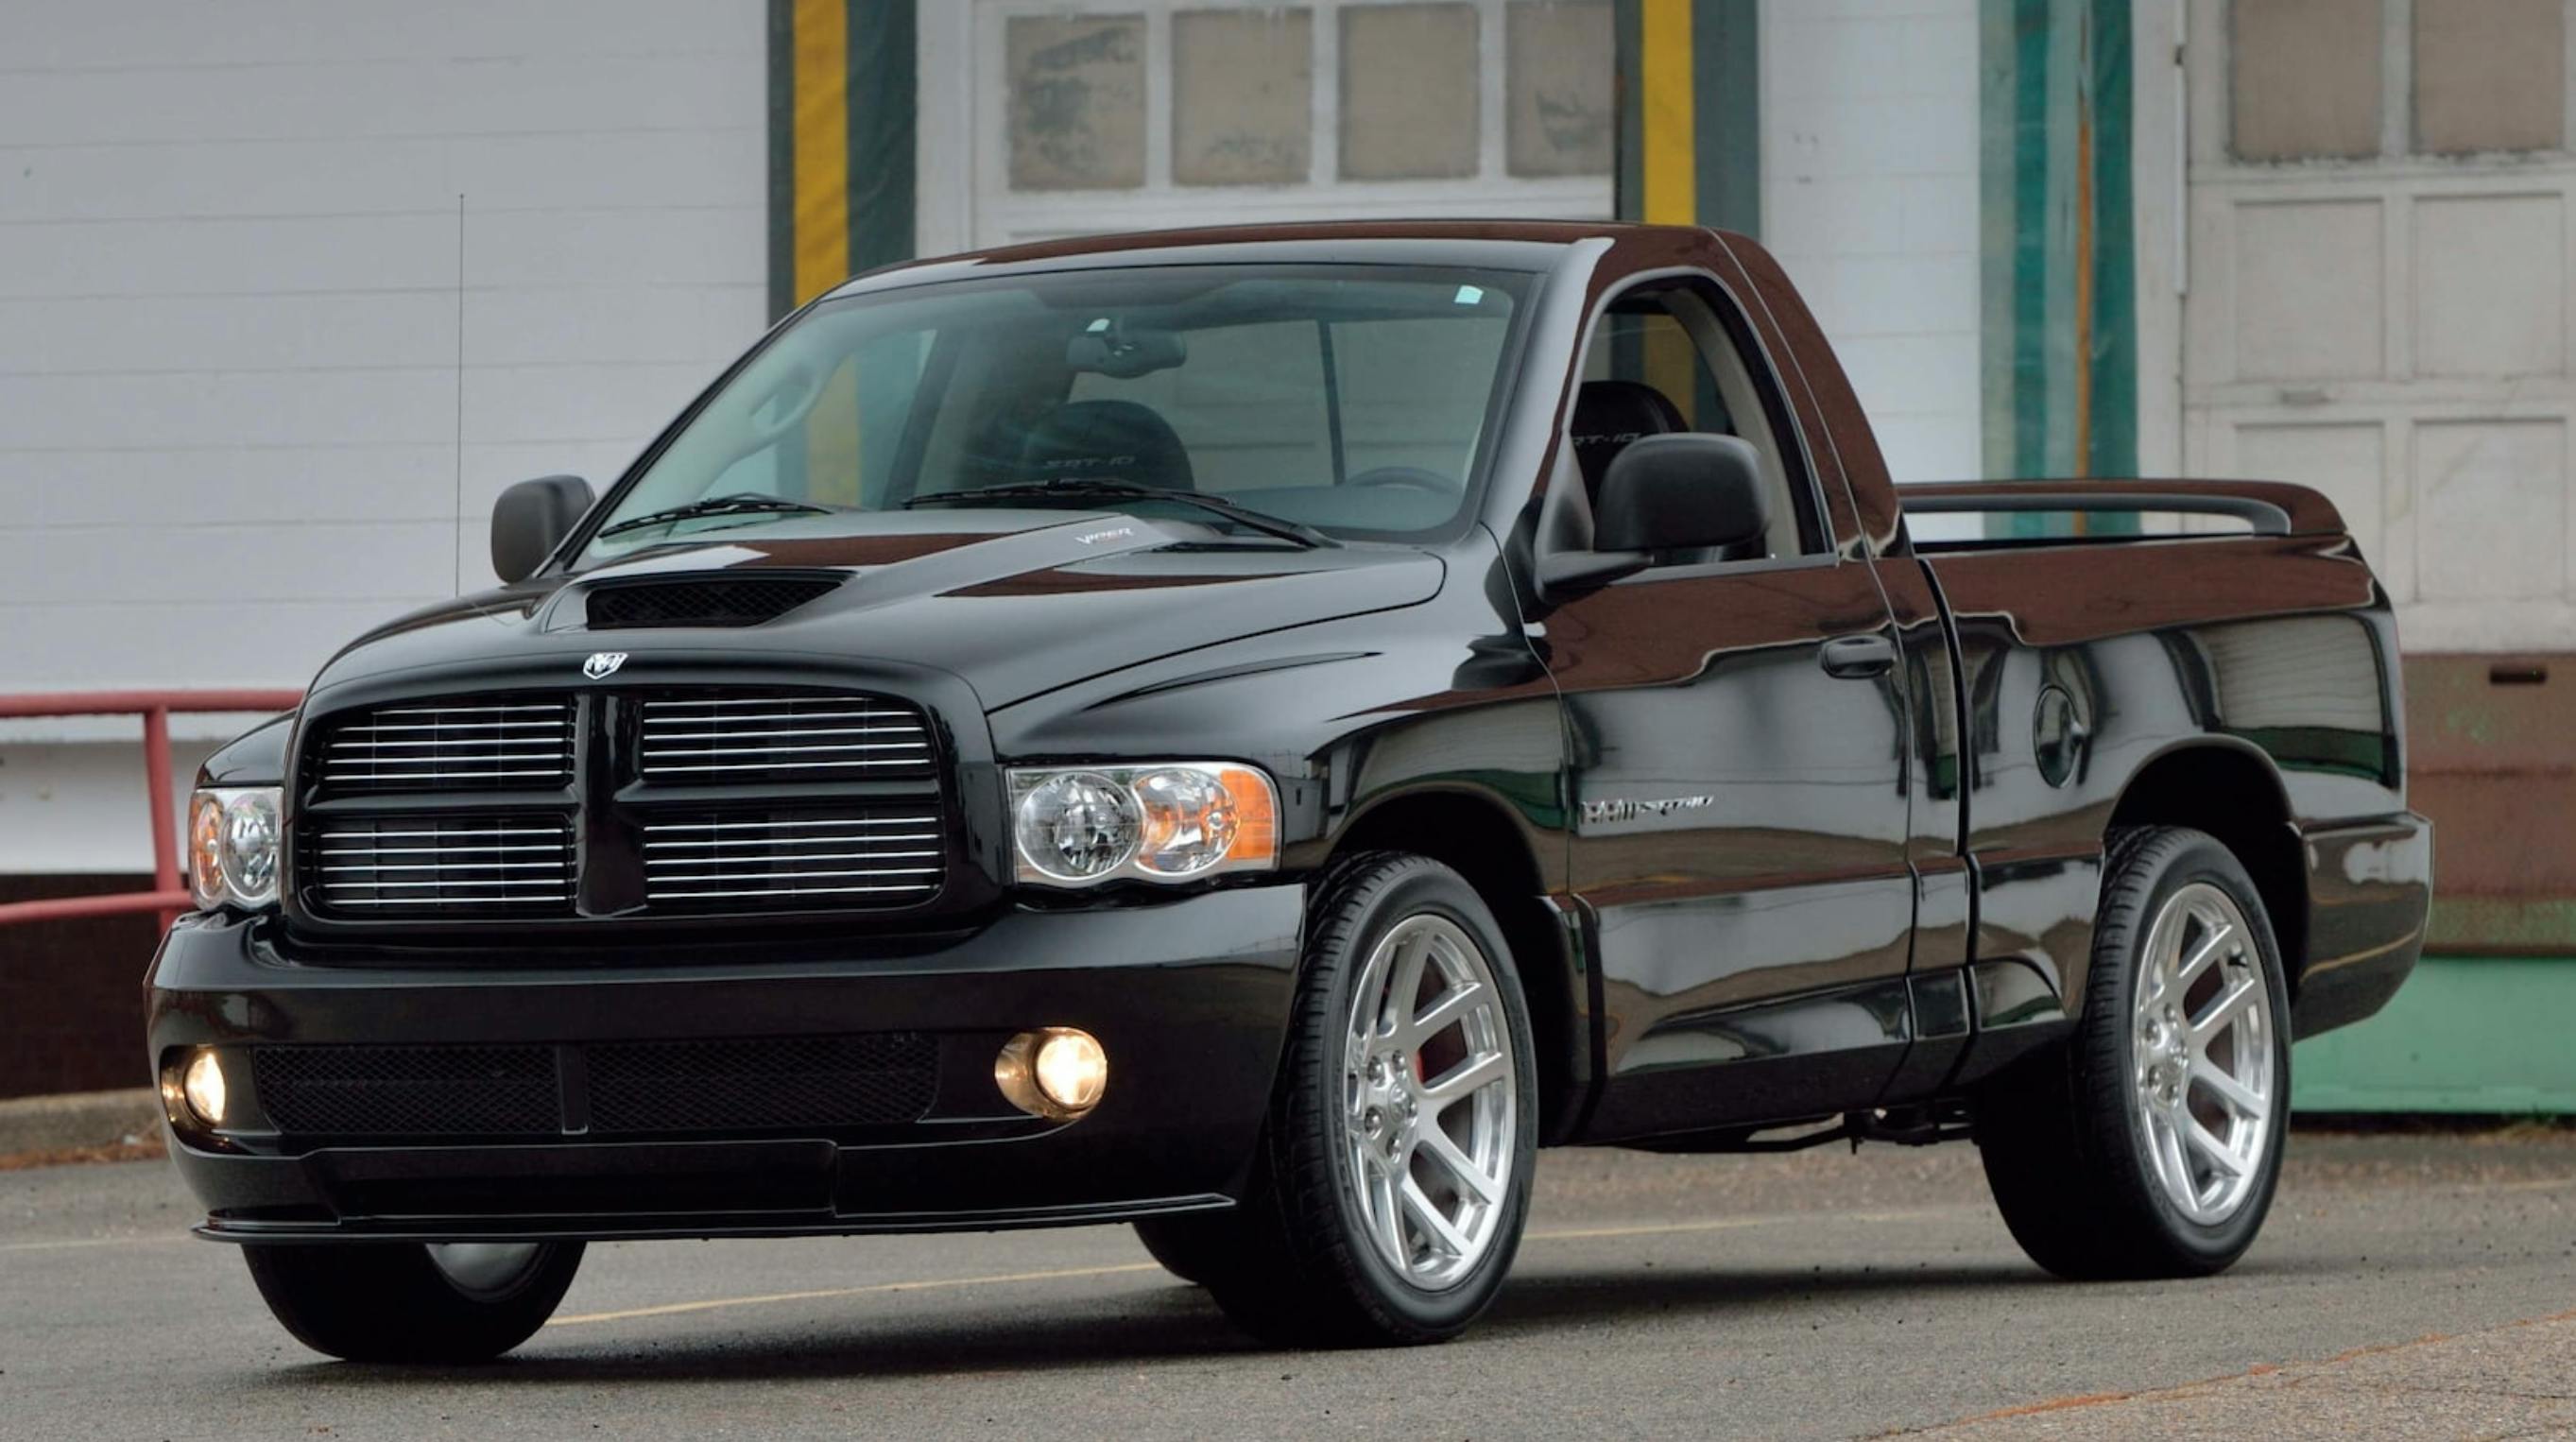 Dodge's Viper-powered truck finally striking collector market - Hagerty